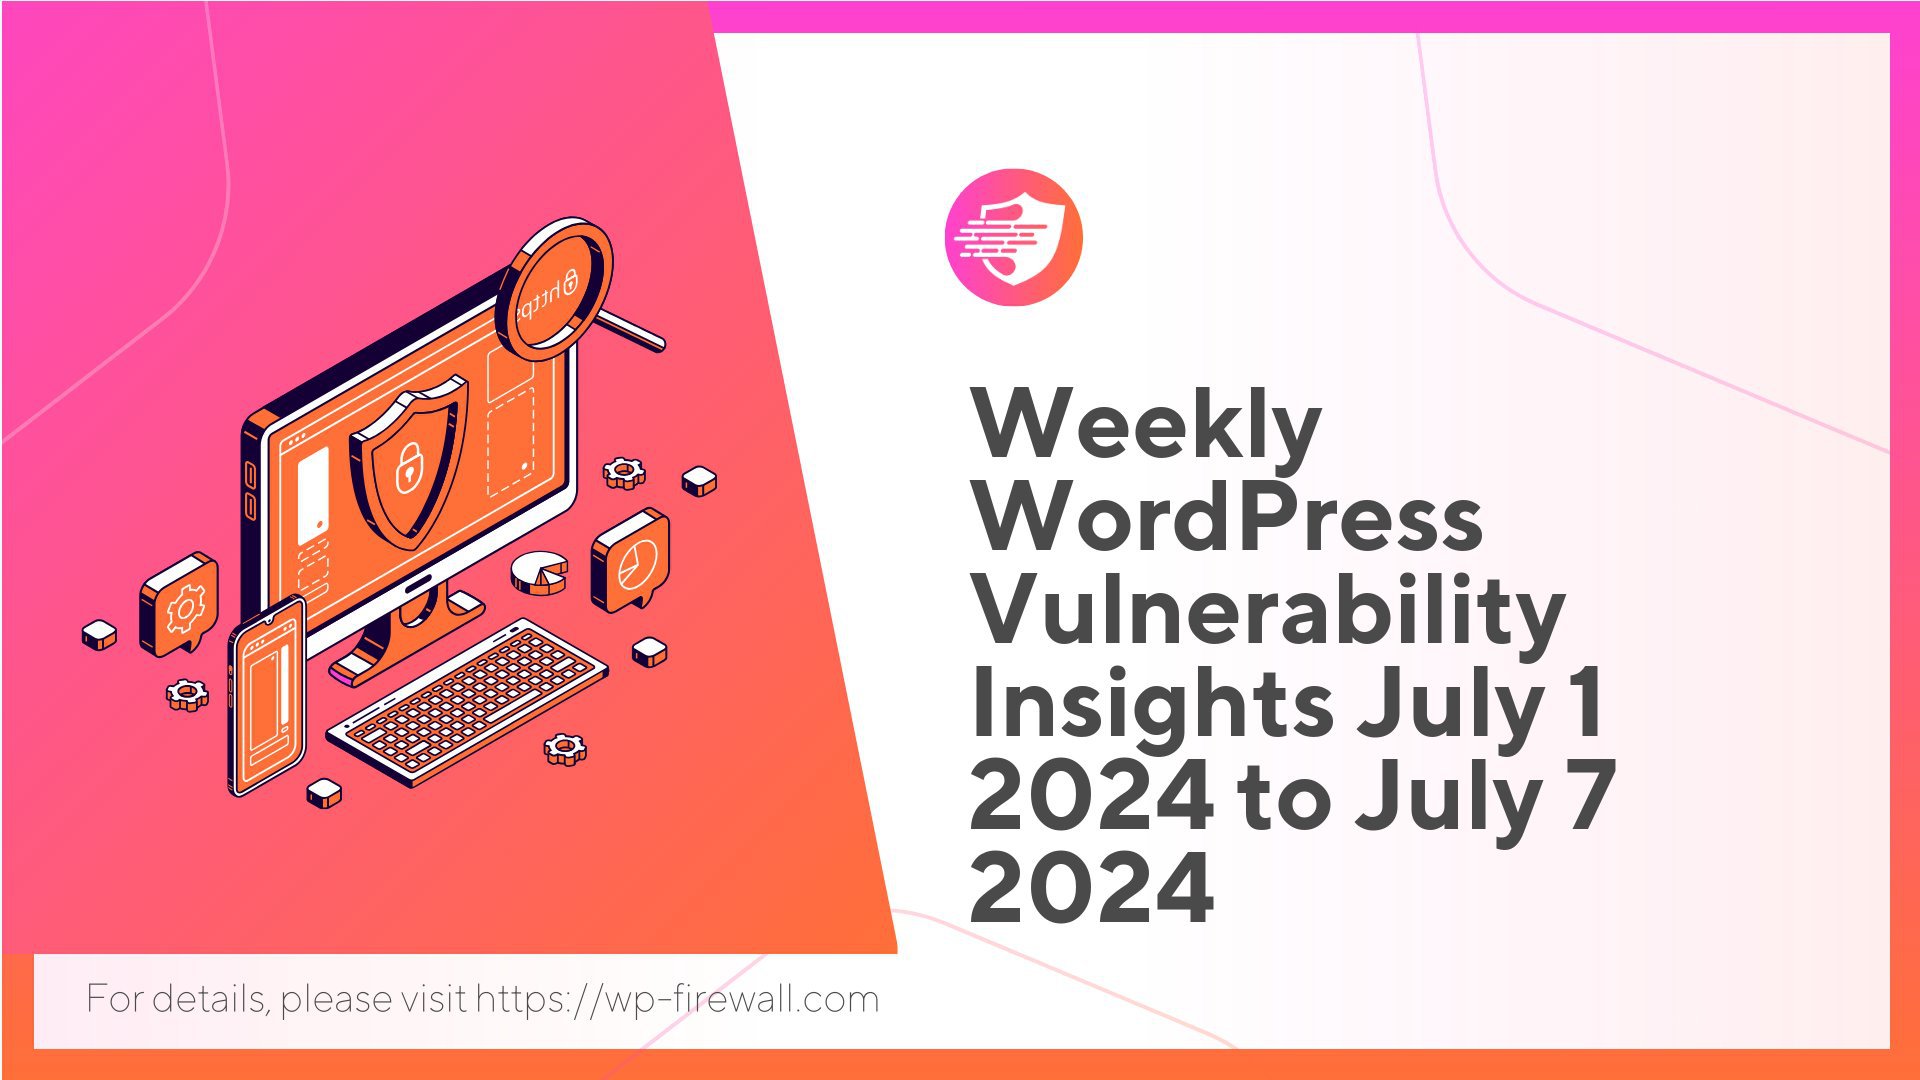 Weekly WordPress Vulnerability Insights July 1 2024 to July 7 2024 cover